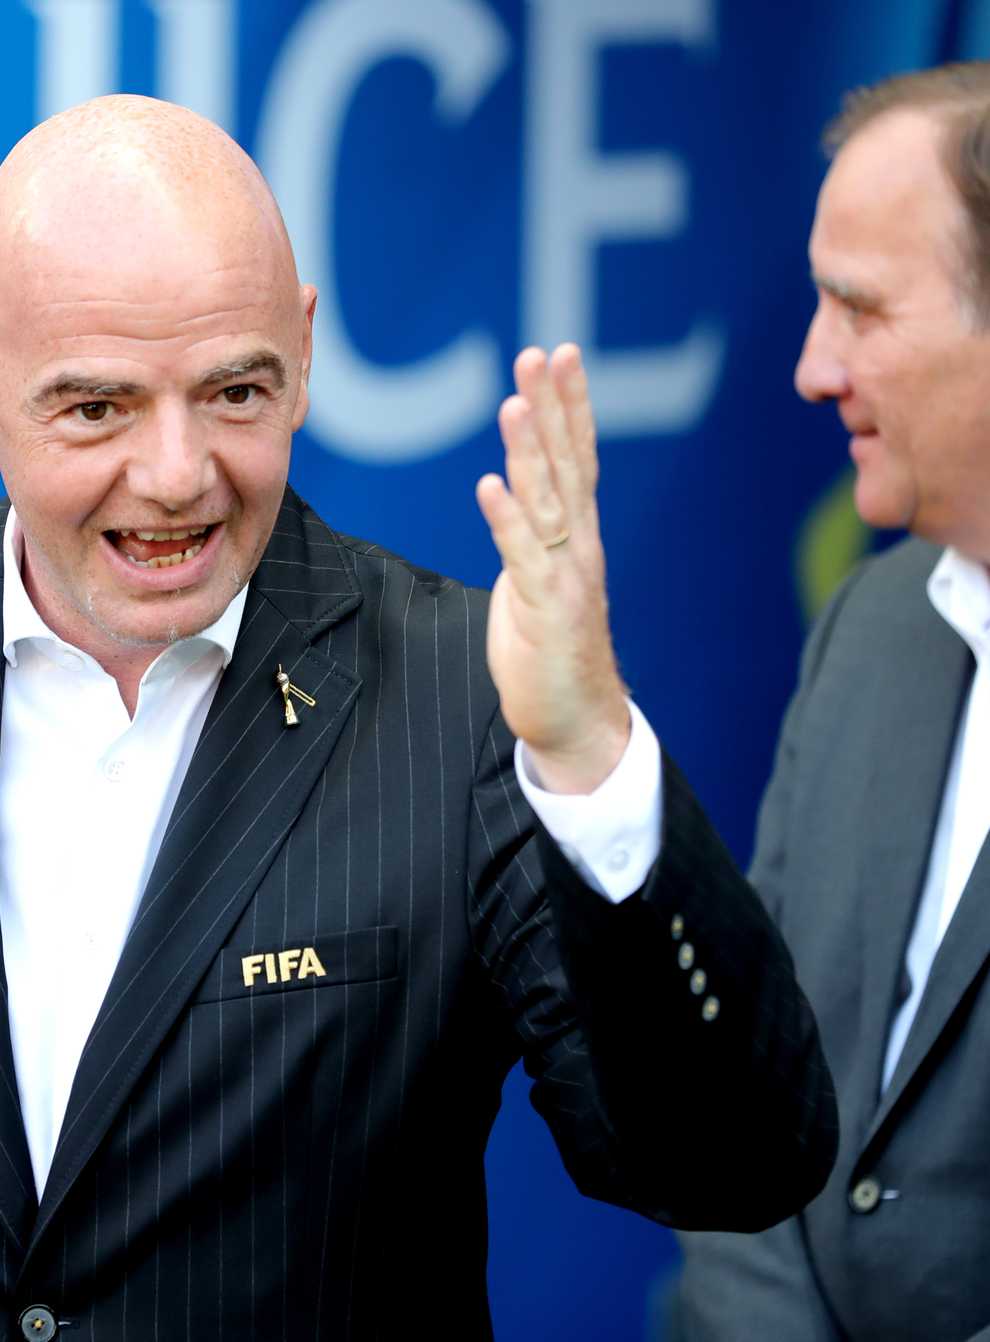 FIFA president Gianni Infantino is the subject of criminal proceedings over meetings he held with the Swiss attorney general